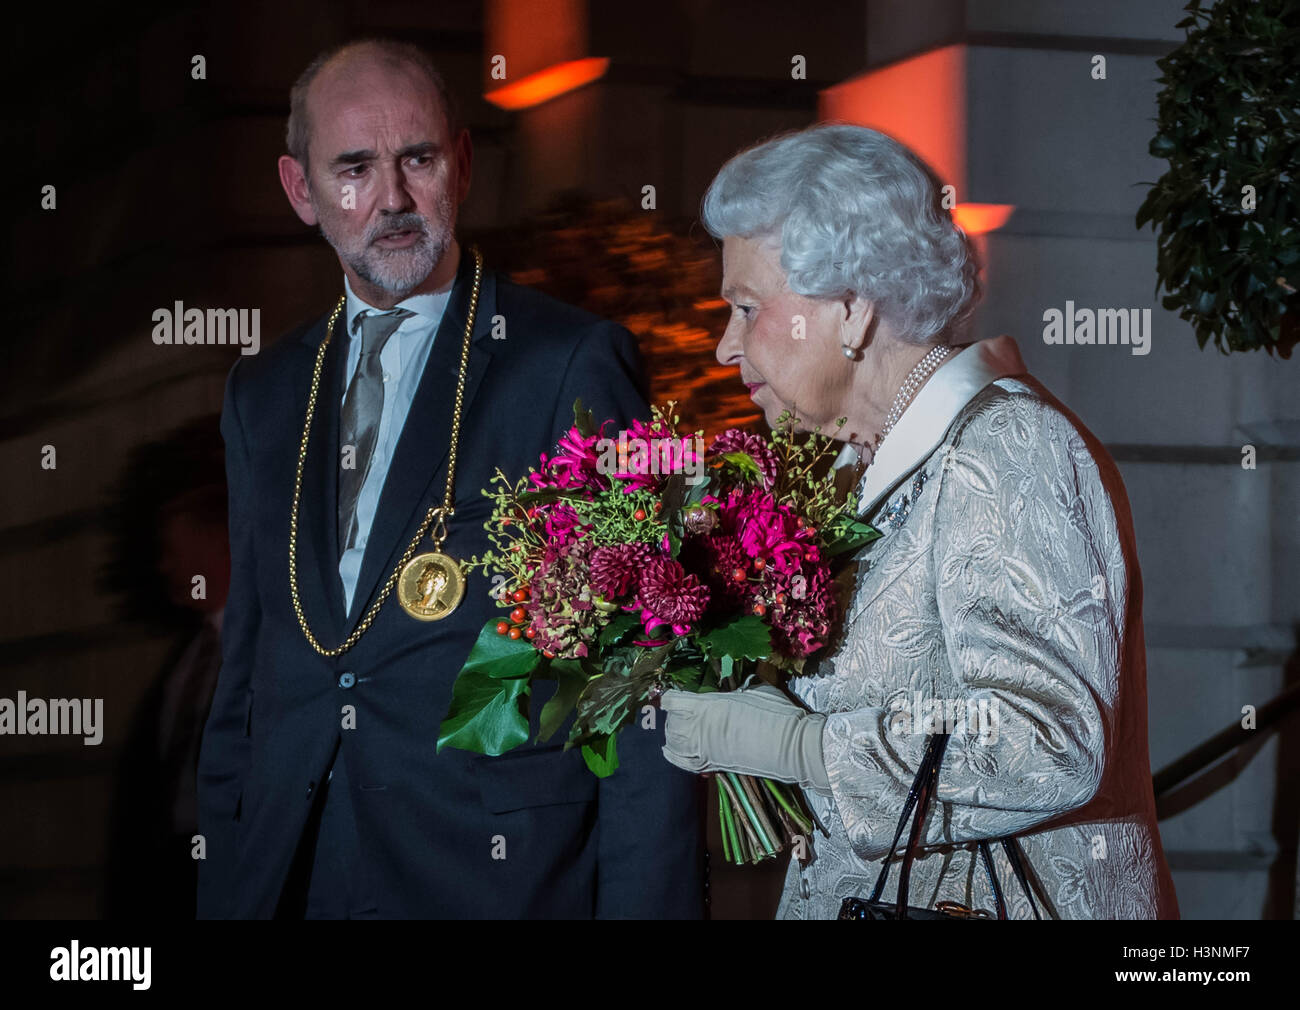 London, UK. 11th October, 2016. The Queen attends awards ceremony at the Royal Academy of Arts Credit:  Guy Corbishley/Alamy Live News Stock Photo